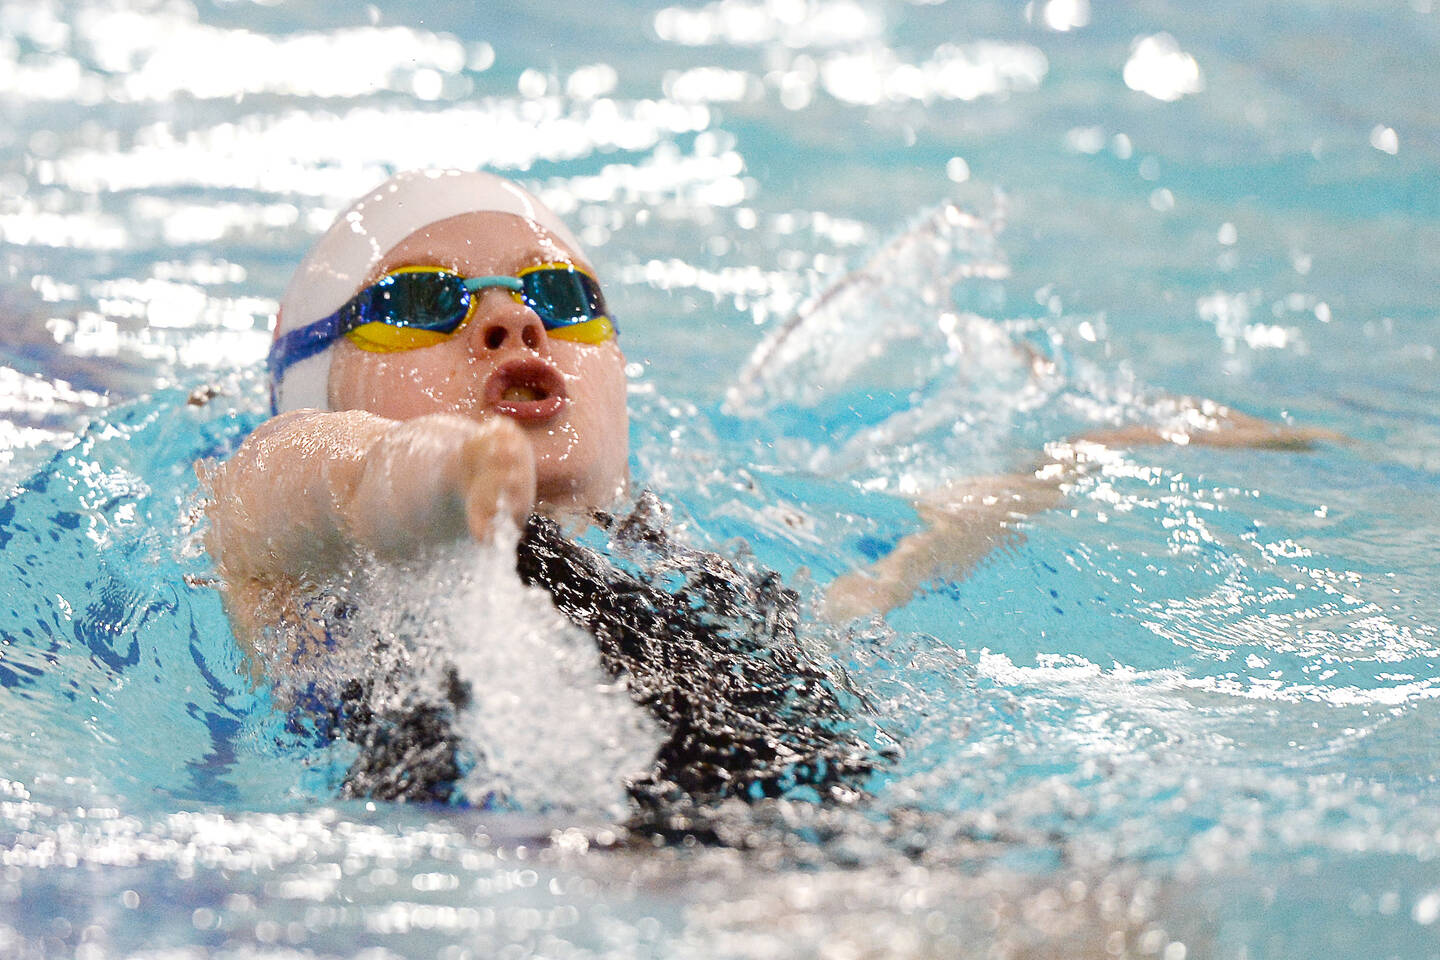 Junior para-swimmer taking part in the 2018 competition.